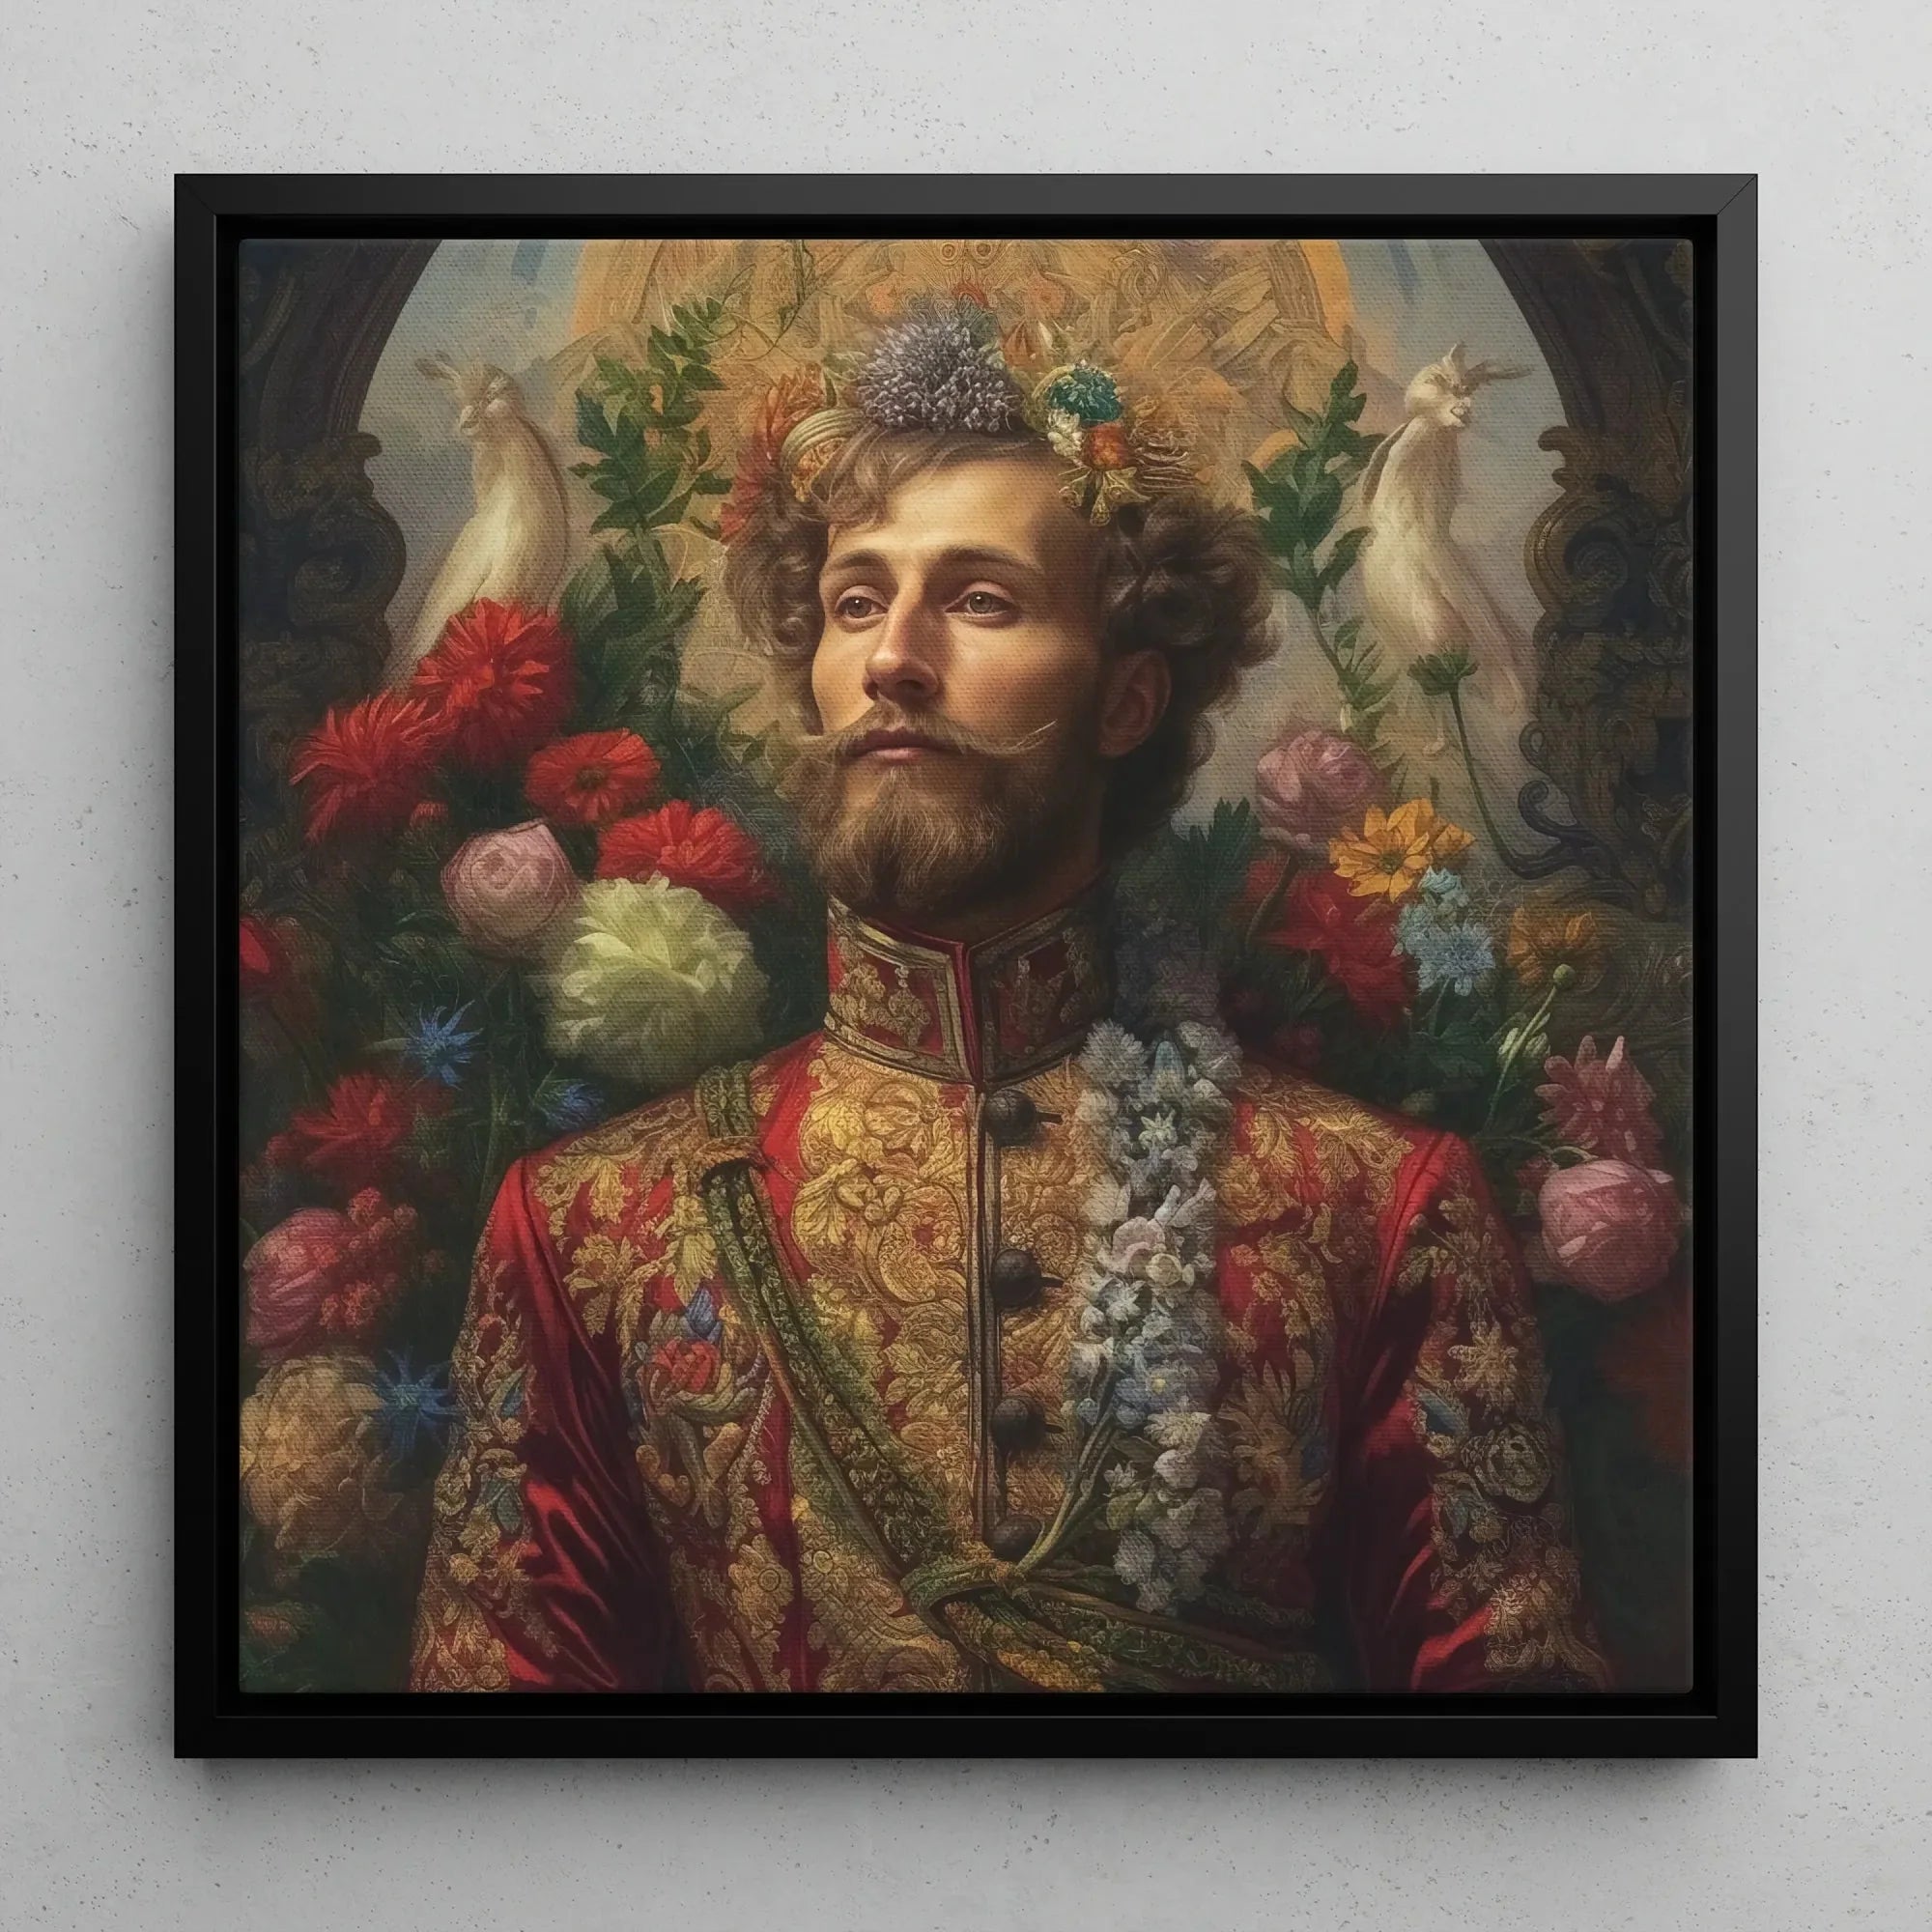 Prince Fyodor - Gay Russian Royalty Queerart Framed Canvas - 16’x16’ / Black Frame / White Wrap - Posters Prints &